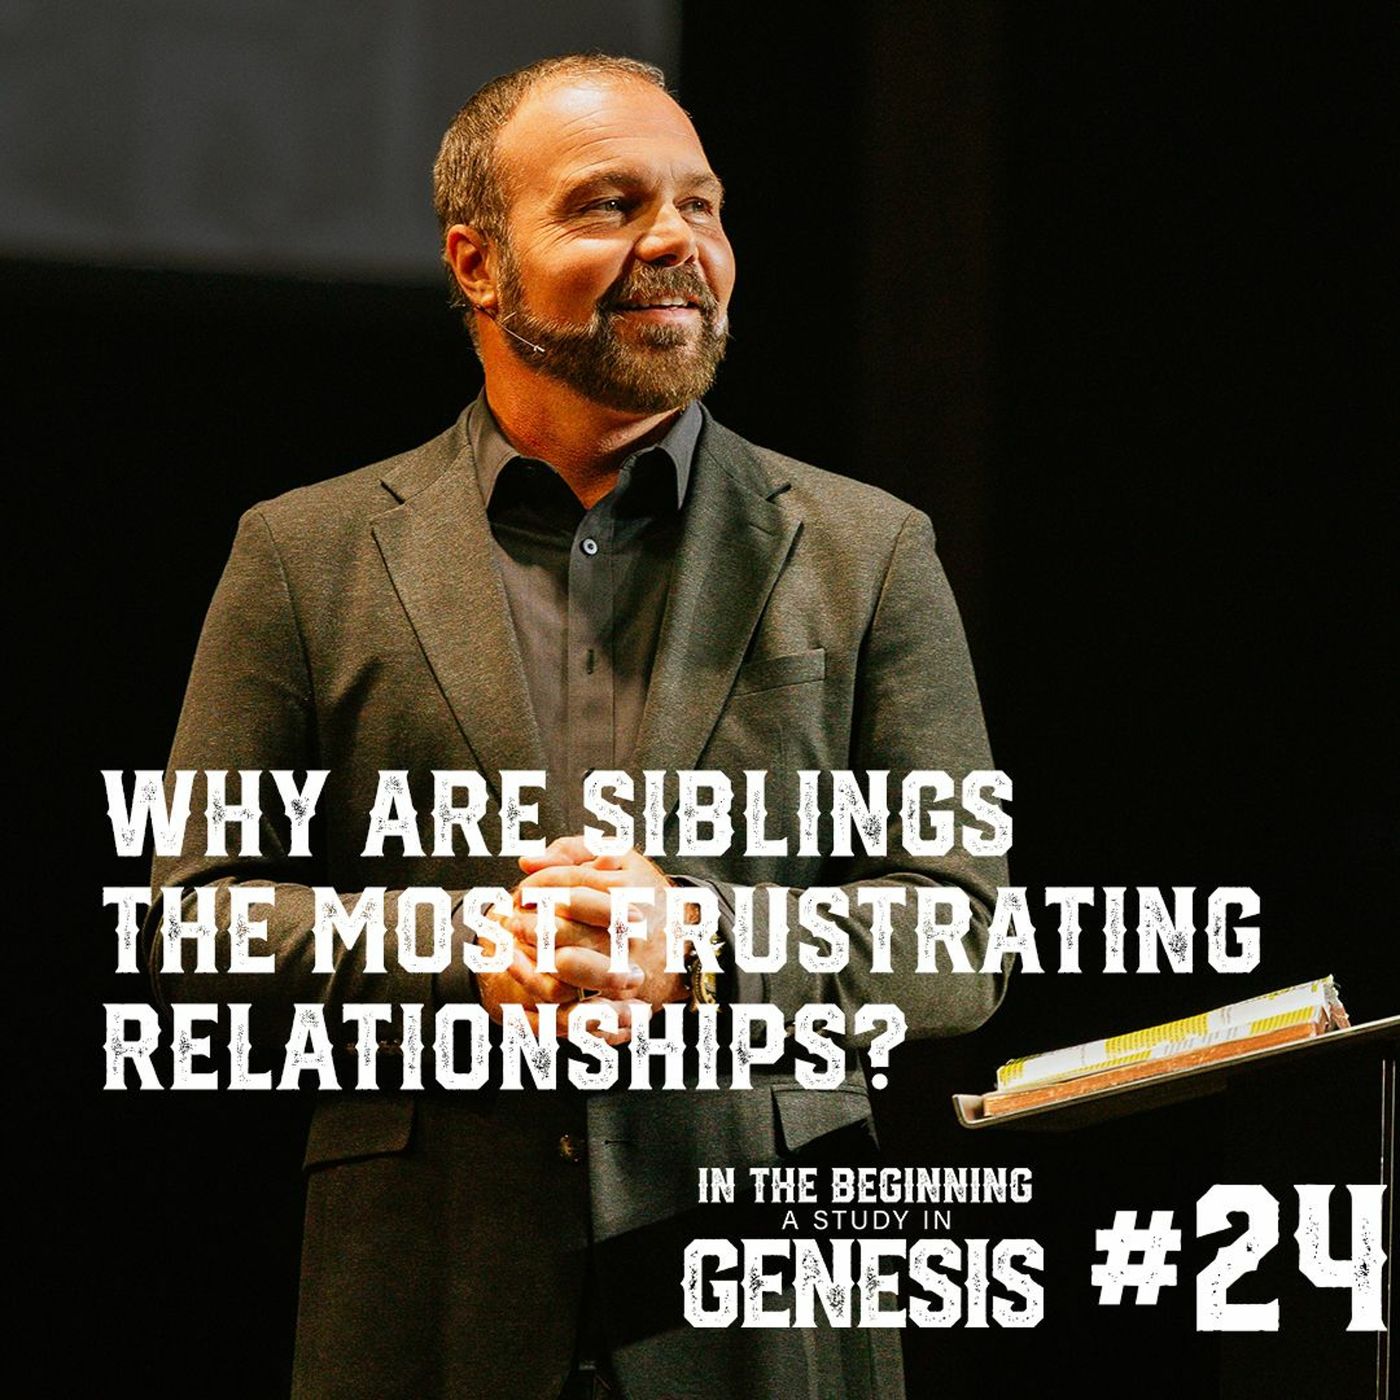 Genesis #24 - Why Are Siblings the Most Frustrating Relationships?